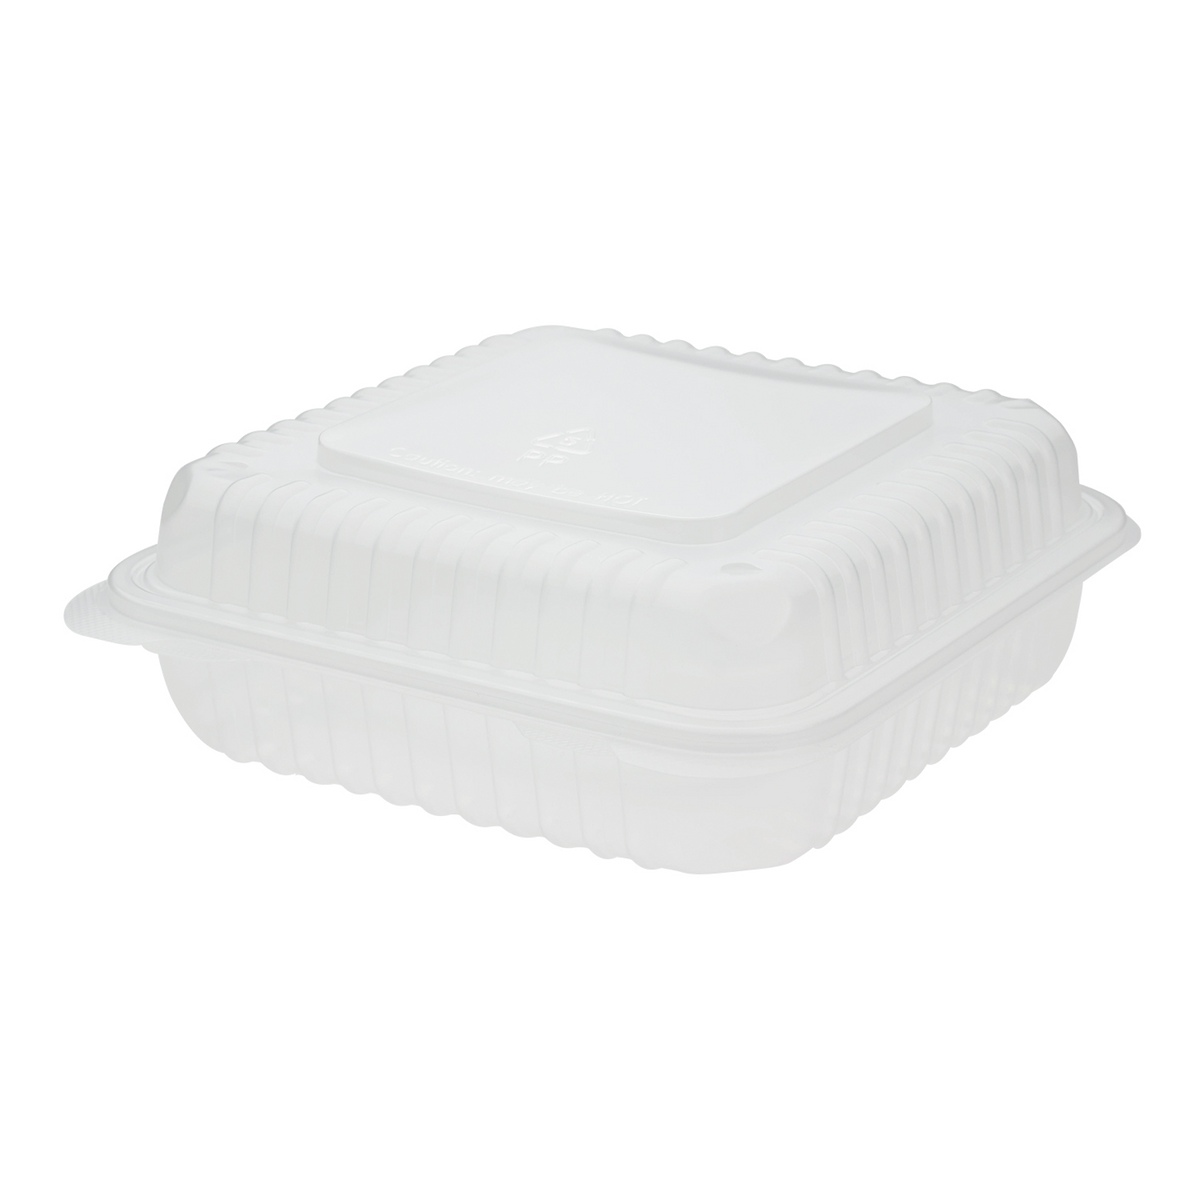 Thermo Tek 39 oz Square Clear Plastic Clamshell Container - Anti-Fog - 7  3/4 x 7 3/4 x 2 1/2 - 100 count box